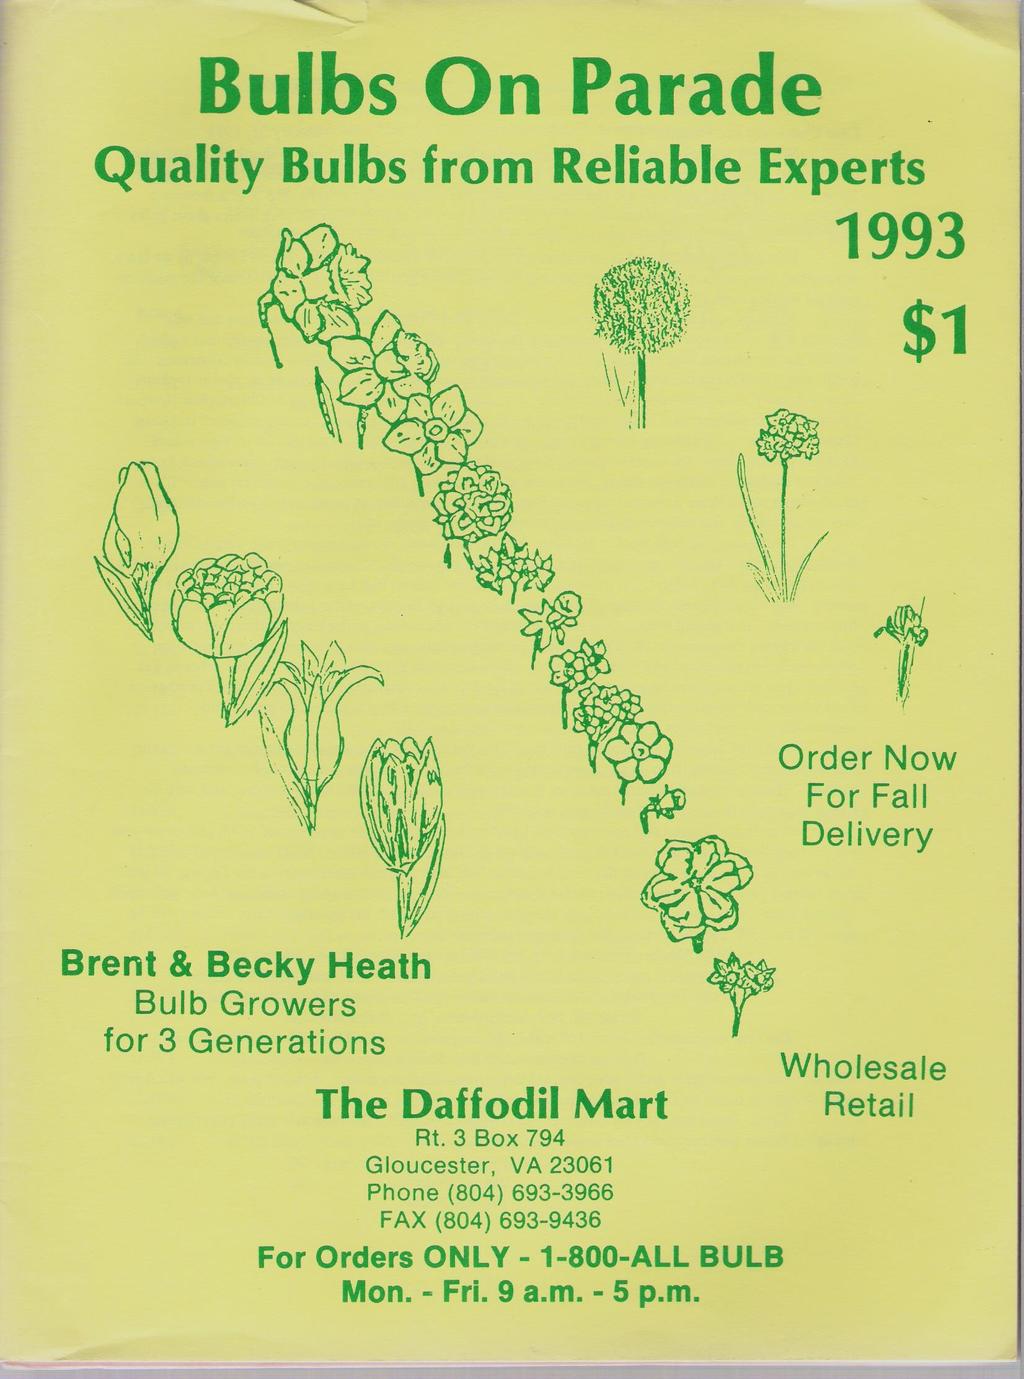 Bulbs On Parade Quality Bulbs from Reliable Experts 1993 $1 Order Now For Fall Delivery Brent & Becky Heath Bulb Growers for 3 Generations The Daffodil